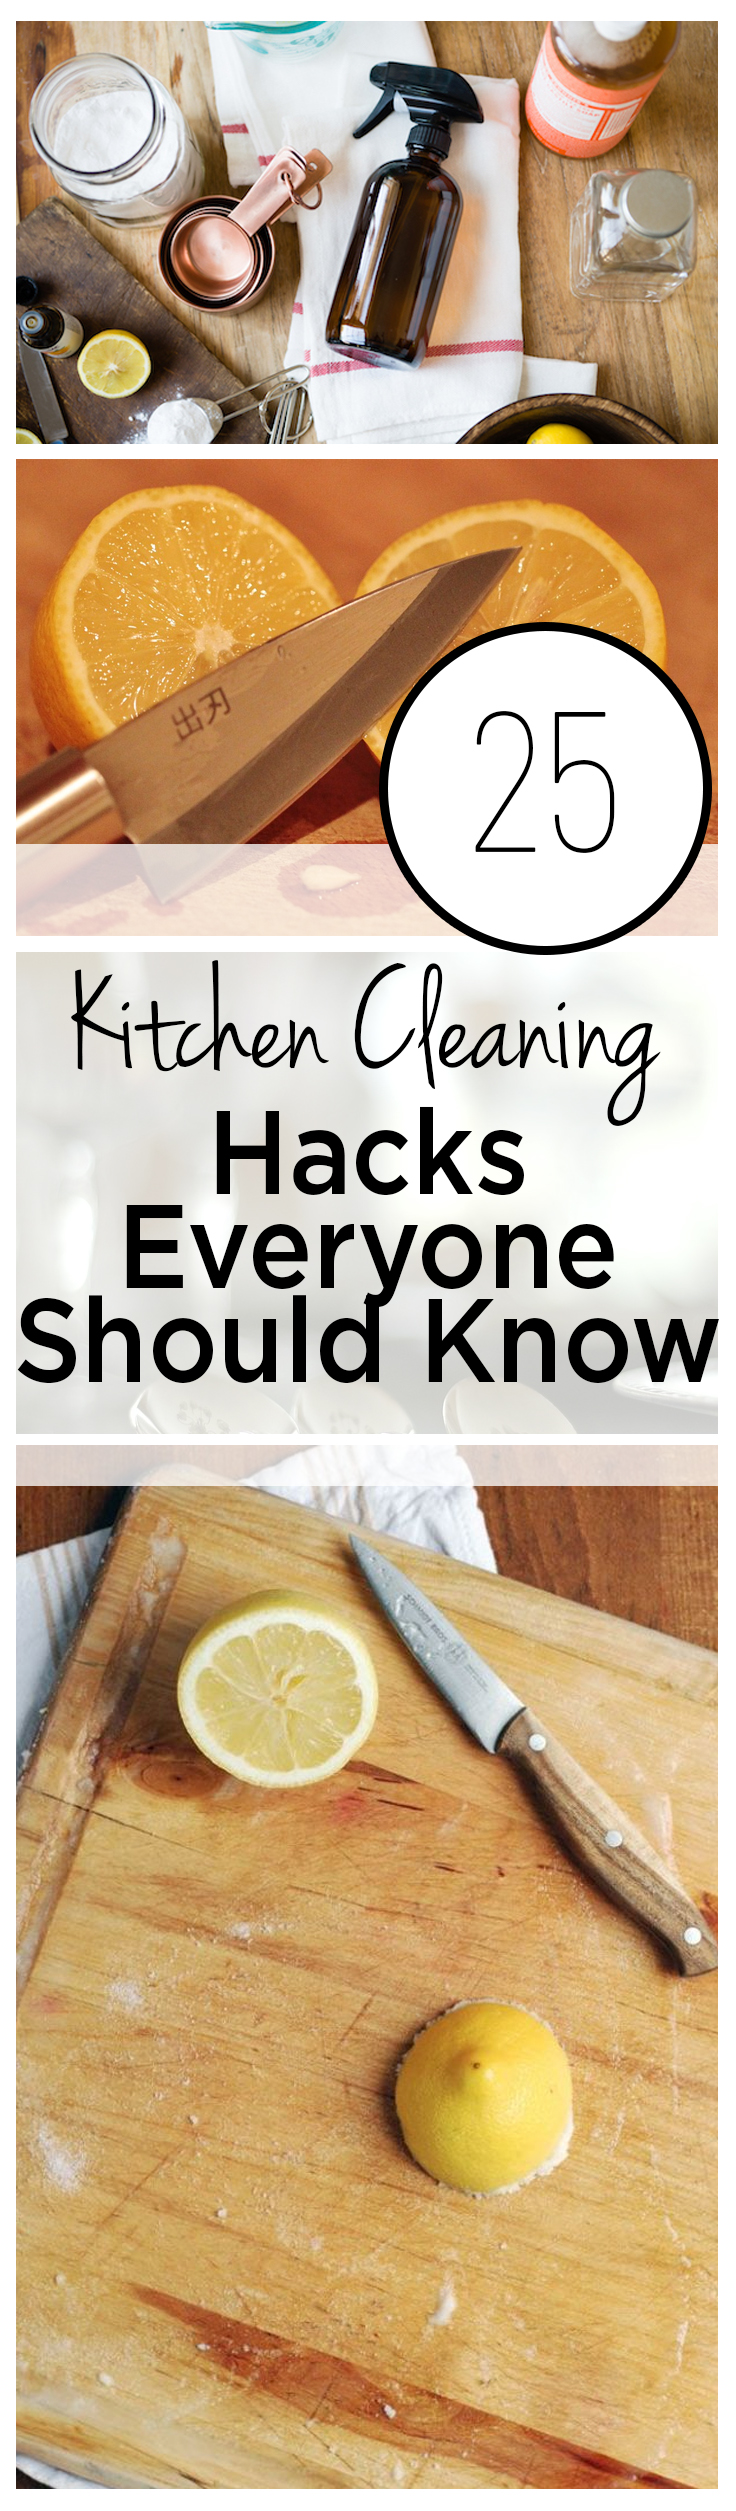 pin-25-kitchen-cleaning-hacks-everyone-should-know